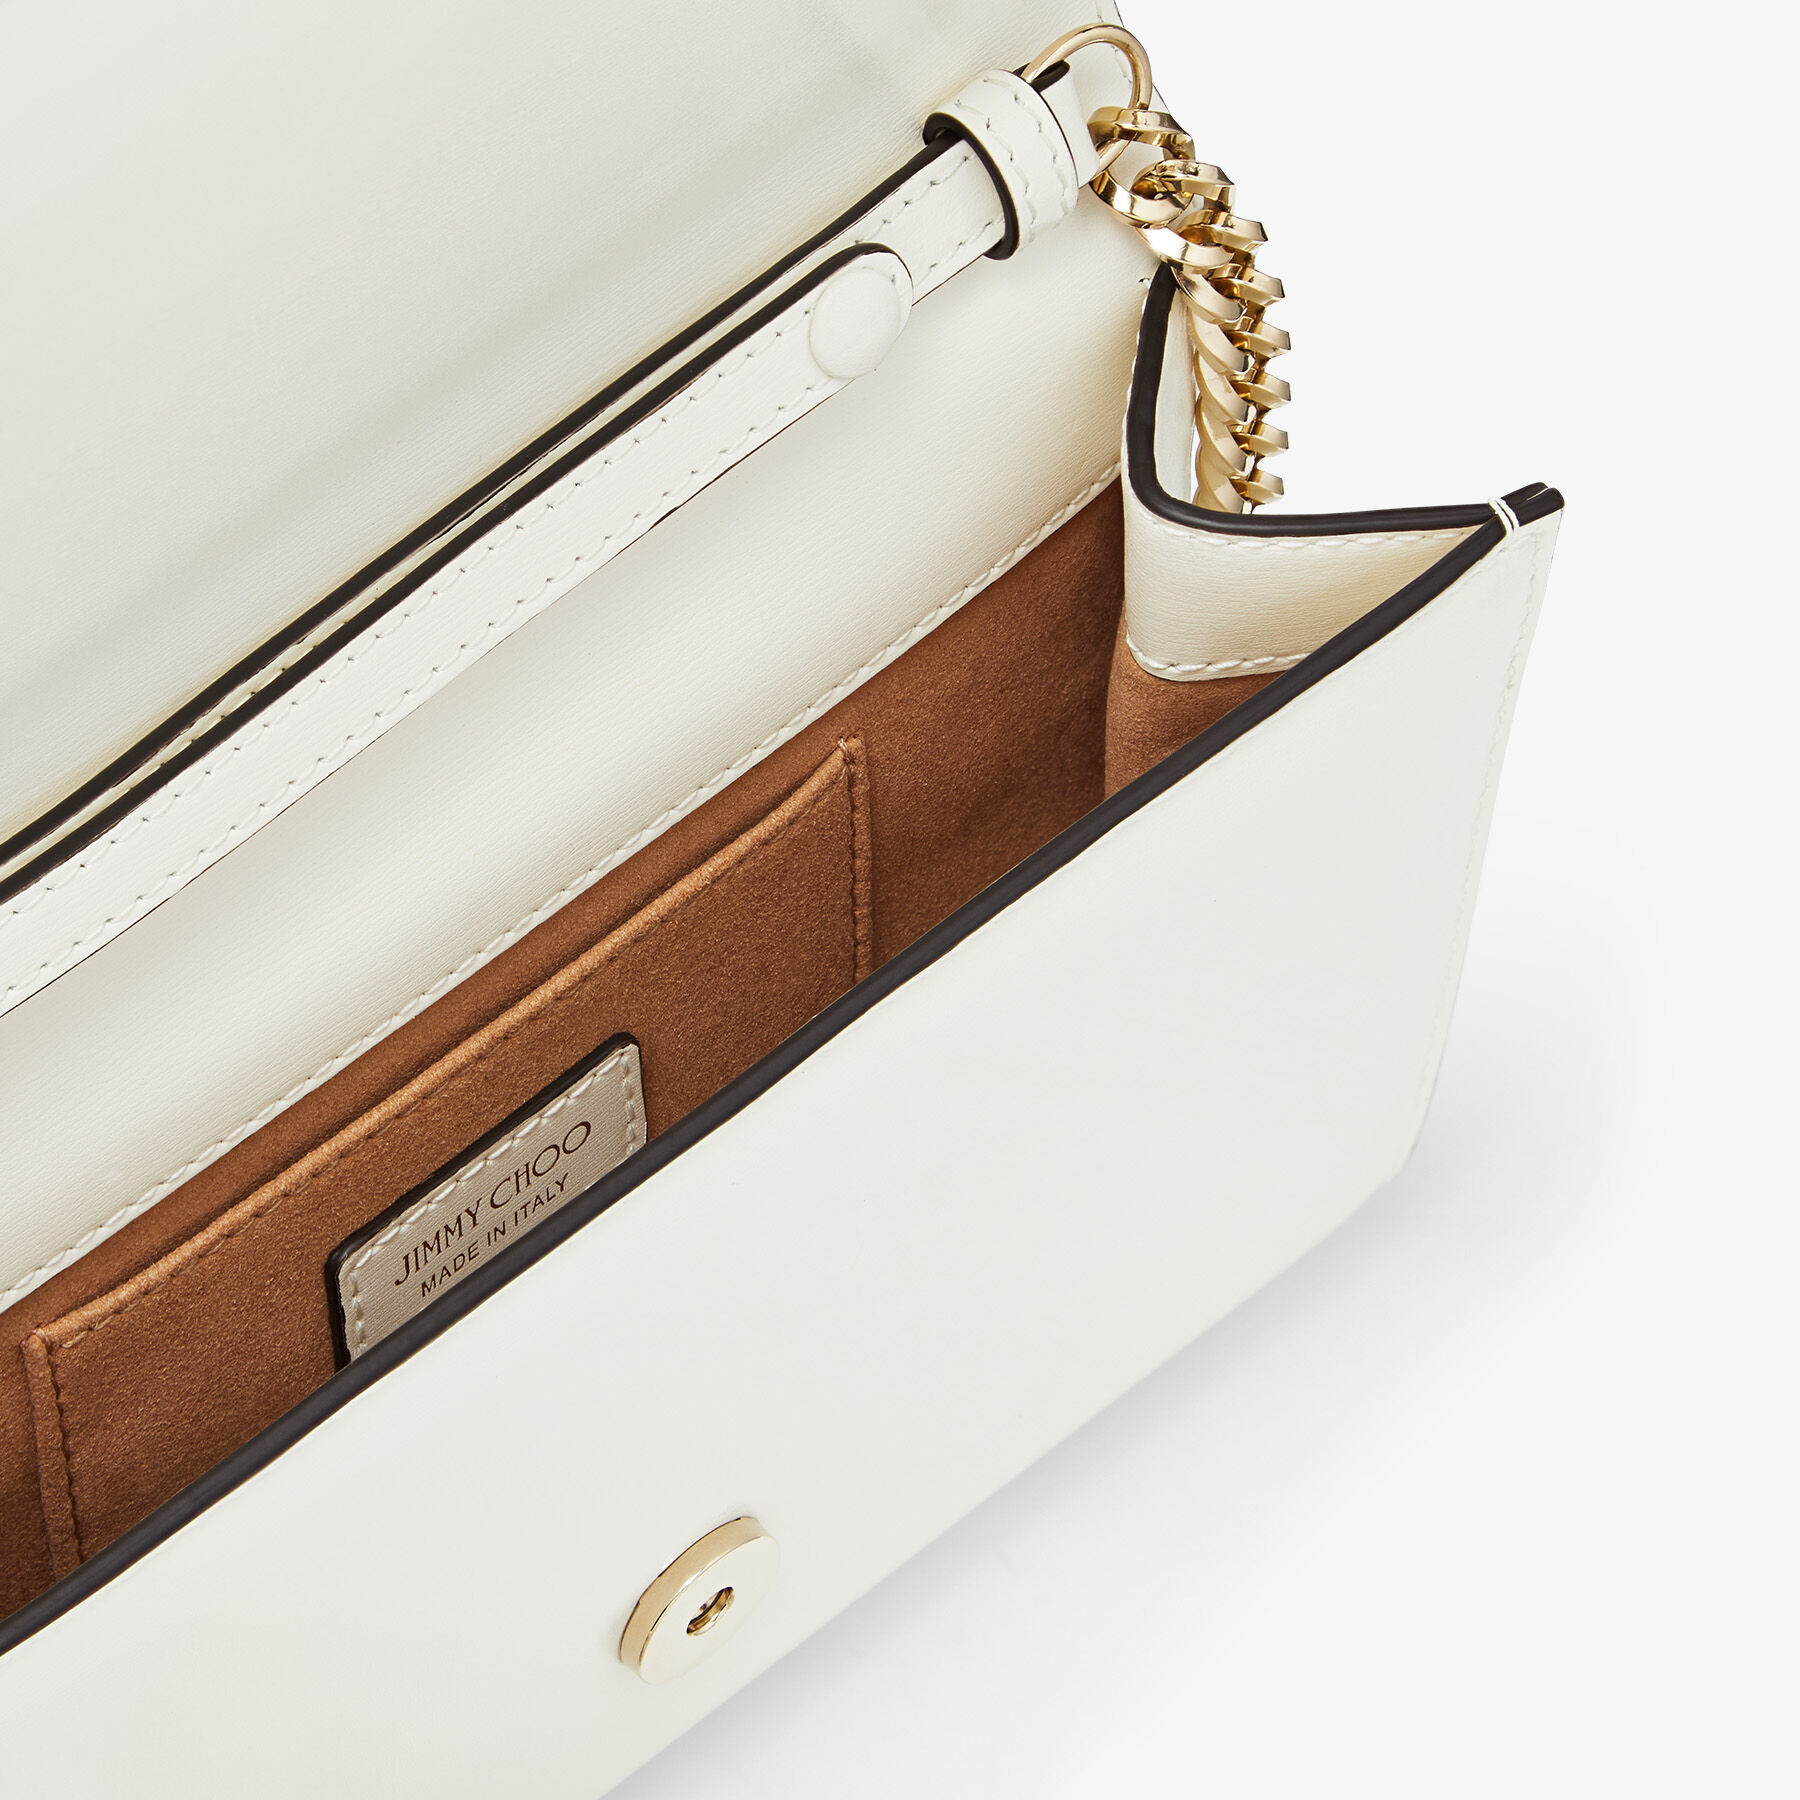 Chloé Clutch in Canvas and Leather with Embroidered Logo